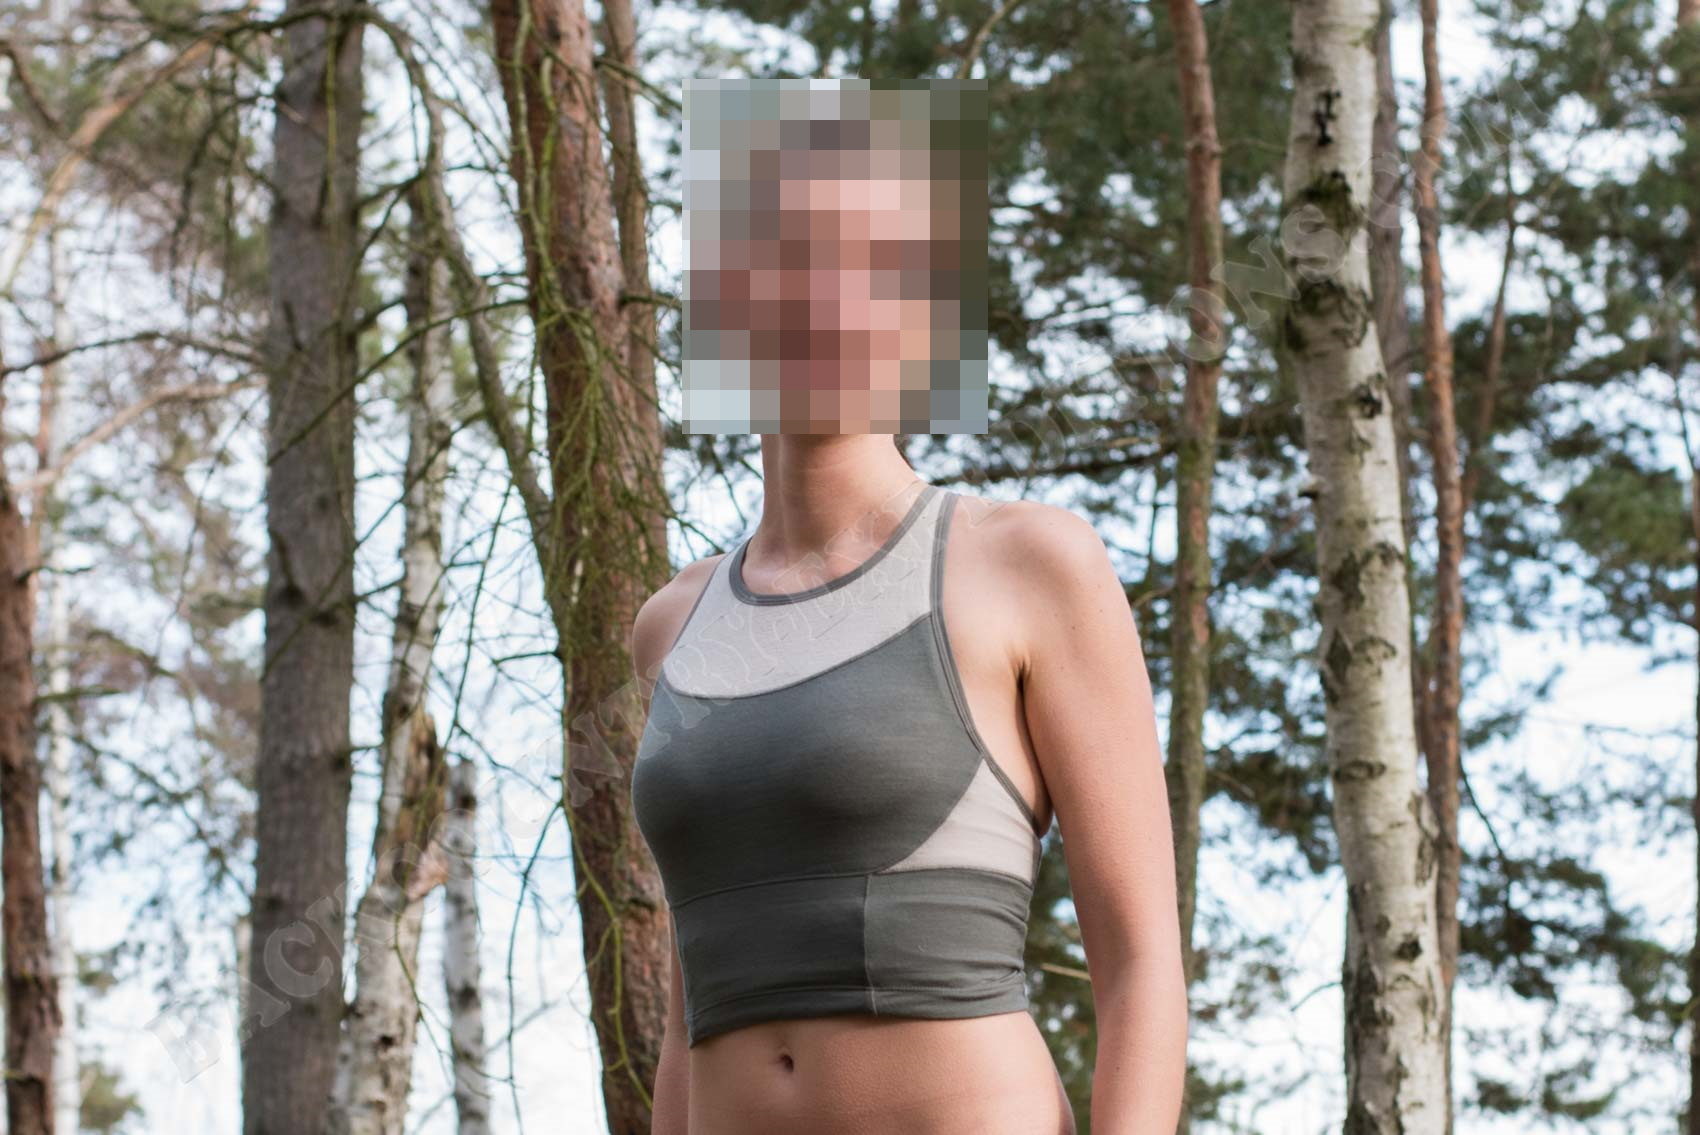 But really—grab the Icebreaker Women's Meld Zone Sport Bra and